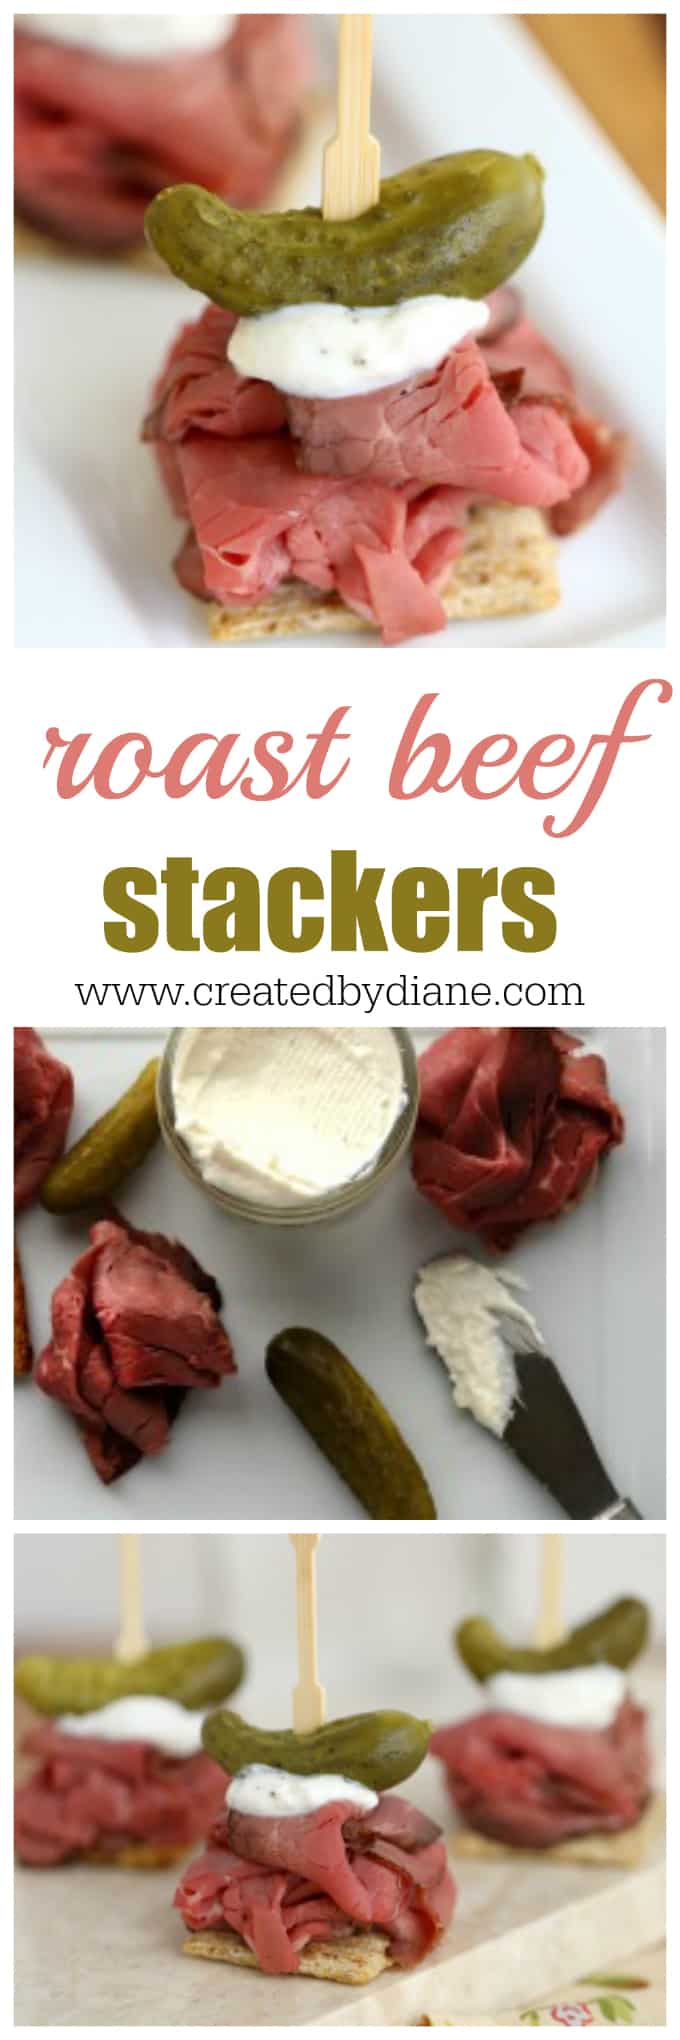 roast beef on crackers with creamy horseradish and a pickle, the PERFECT appetizer or snack www.createdbydiane.com